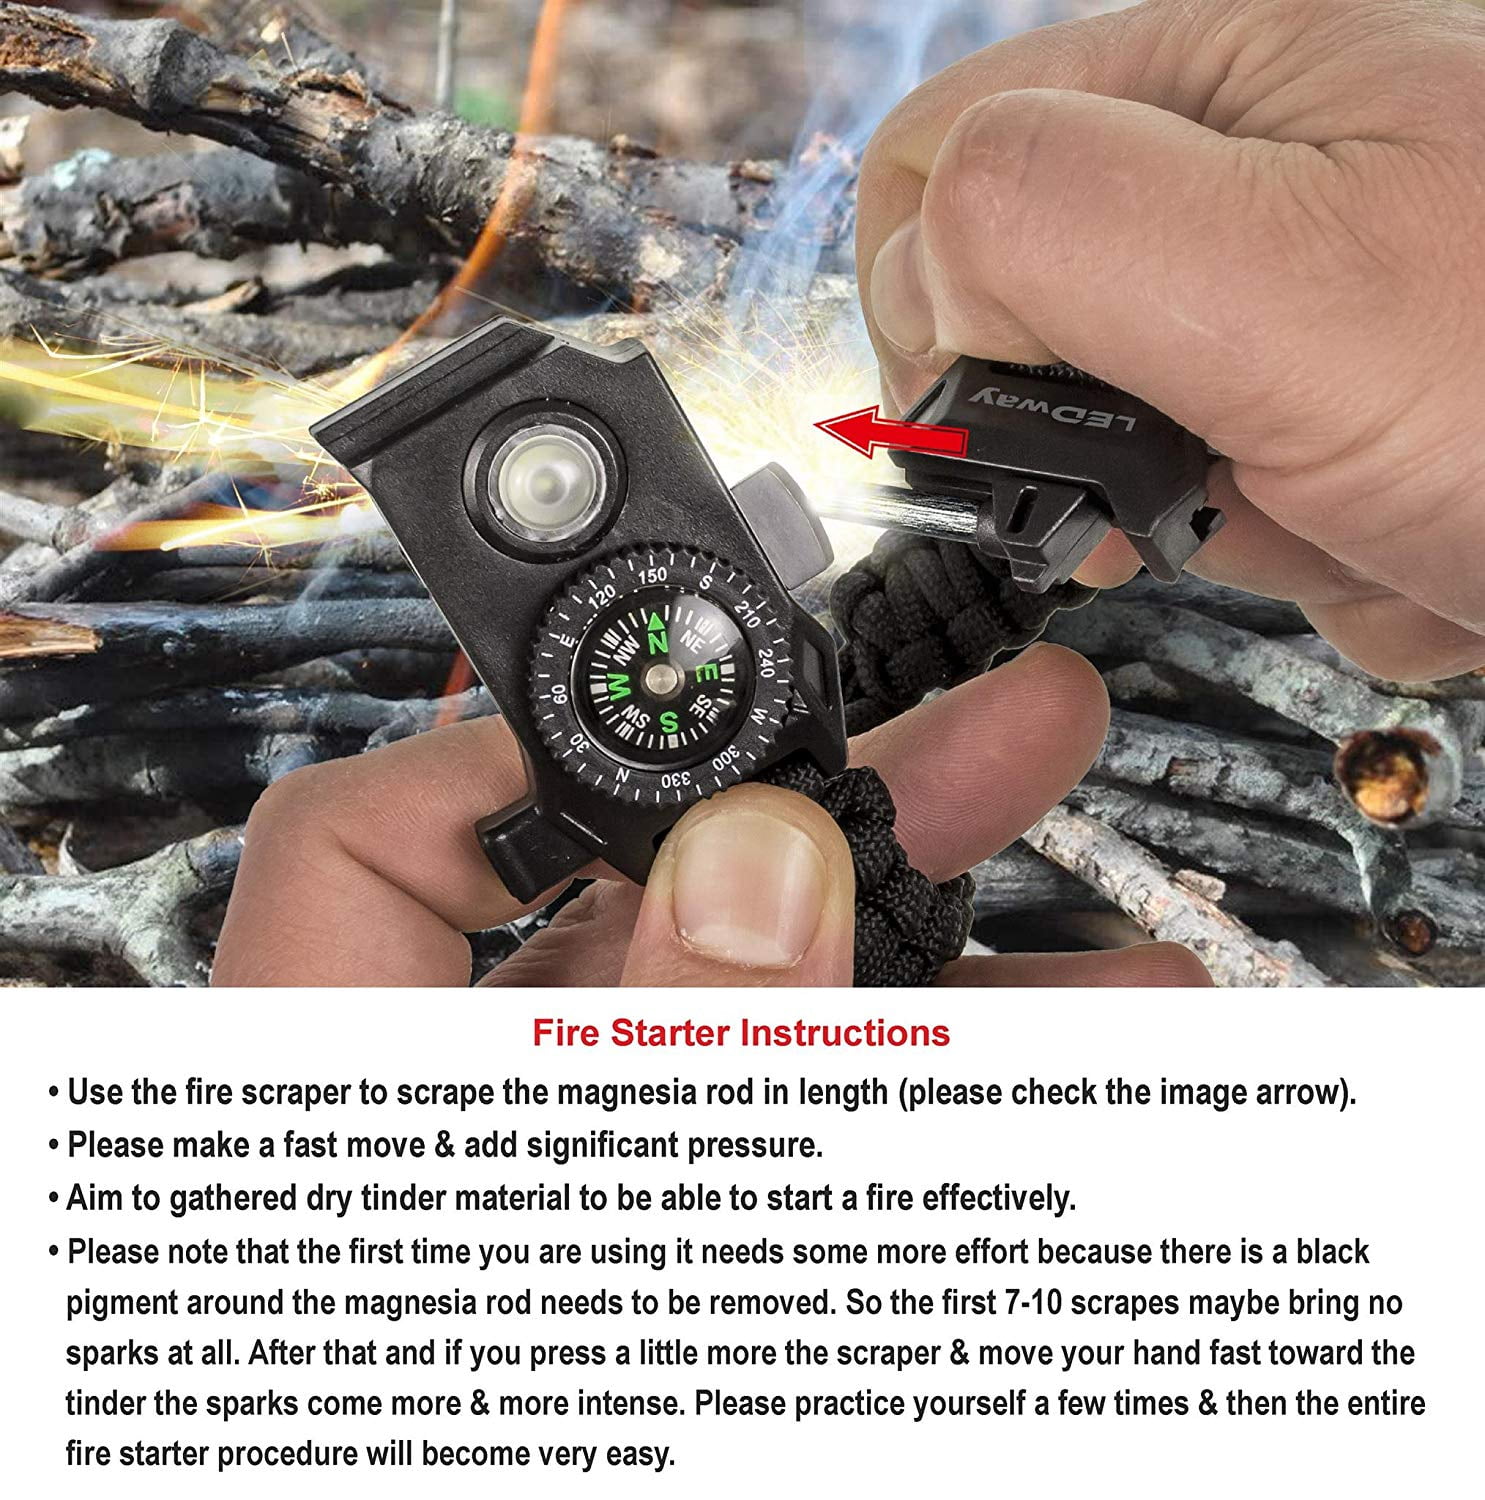 Fire Starter Multi-Tool Wilderness Adventure Rescue Whistle MansWill Adjustable Survival Bracelet 7 Core Paracord 20 in 1 Emergency Sports Wristband Gear Kit Waterproof LED SOS Light Compass 